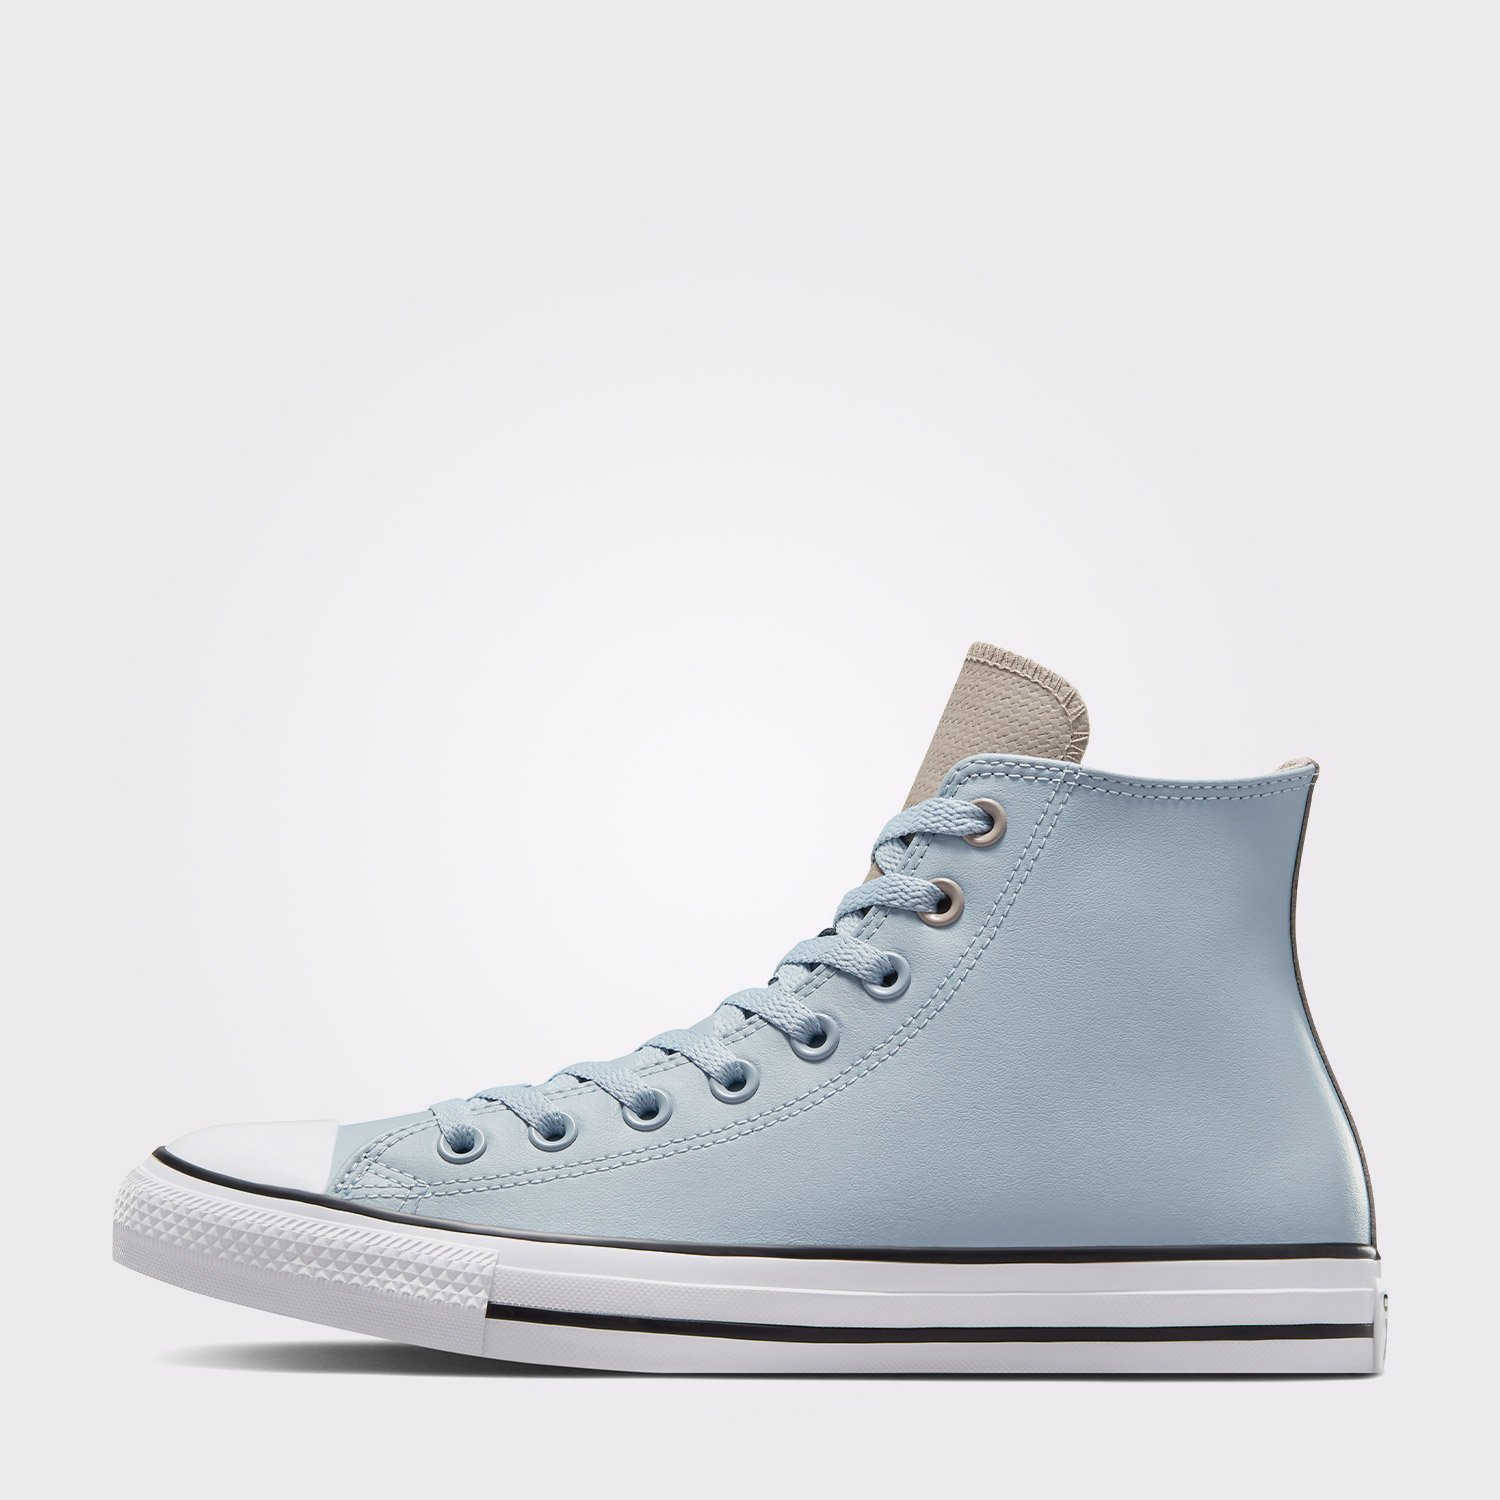  Chuck Taylor All Star Fall Leather